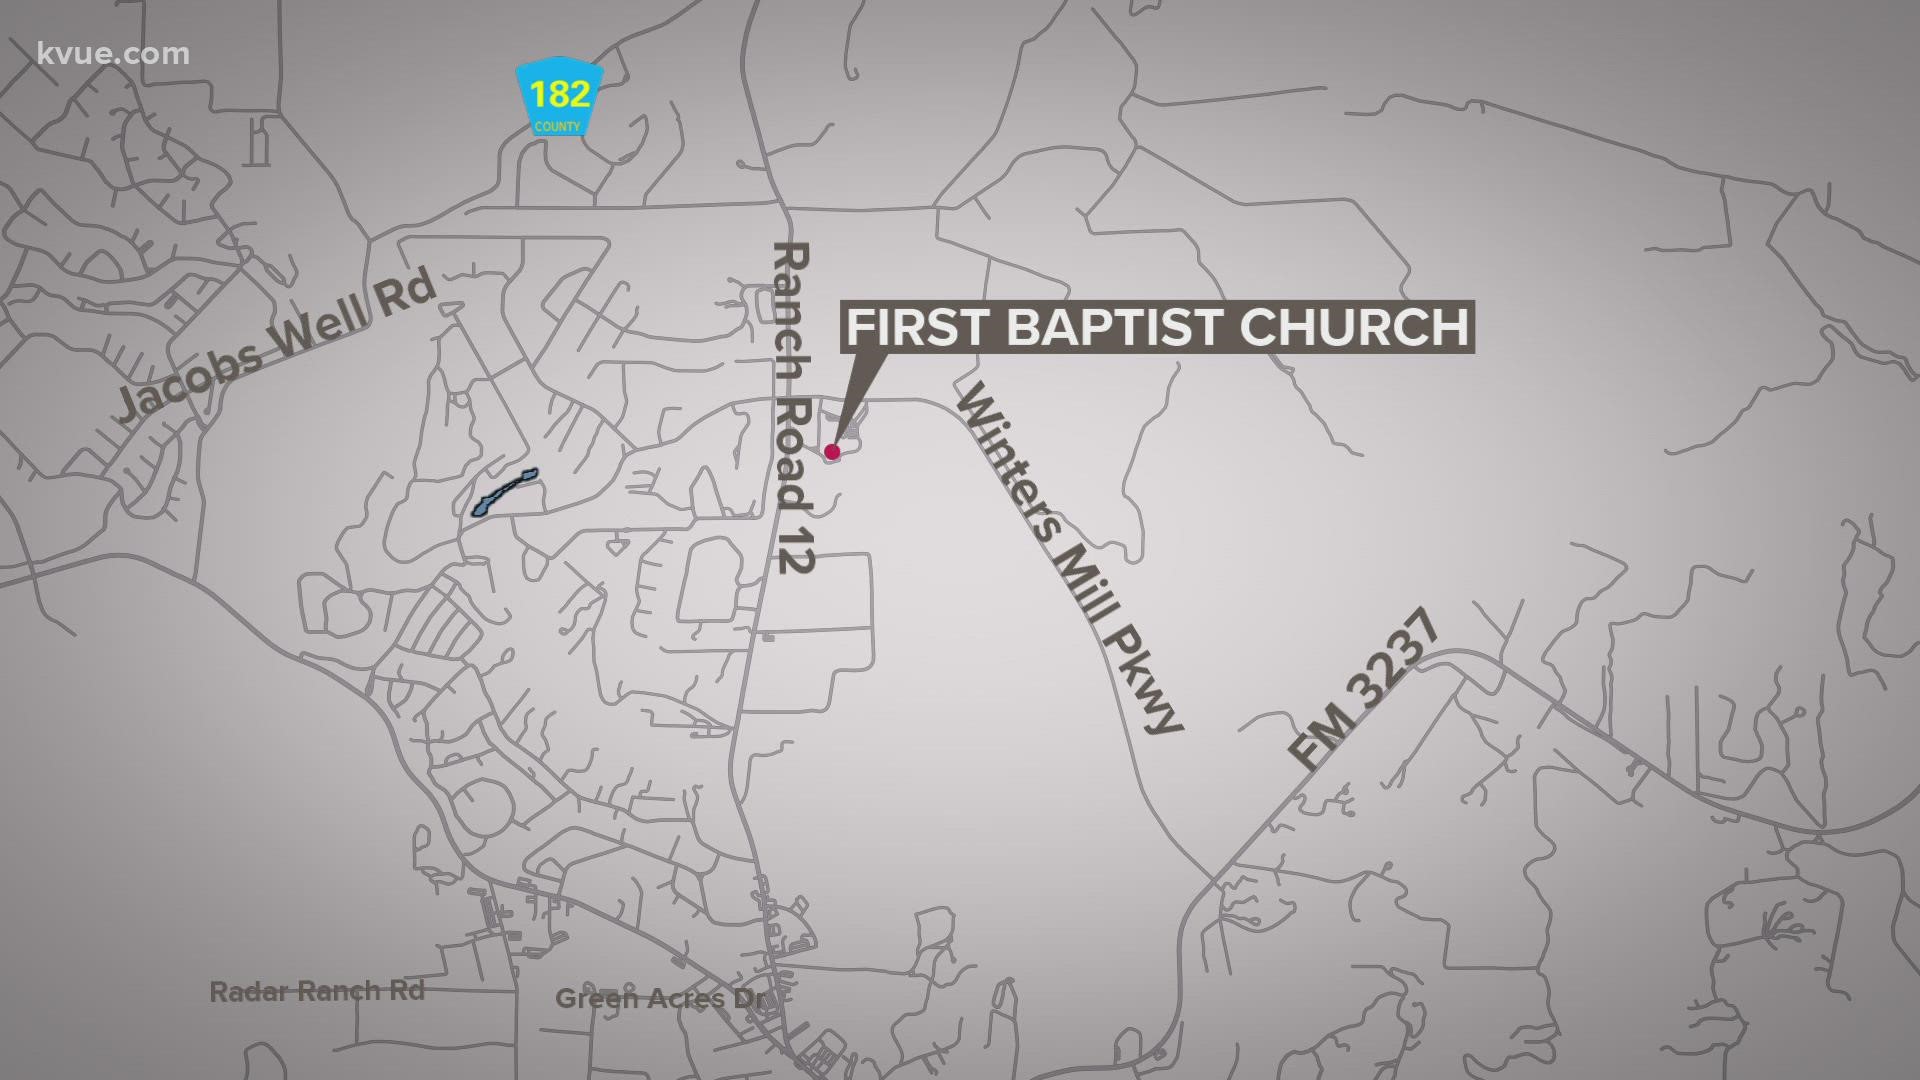 The body was found on the grounds of the First Baptist Church.